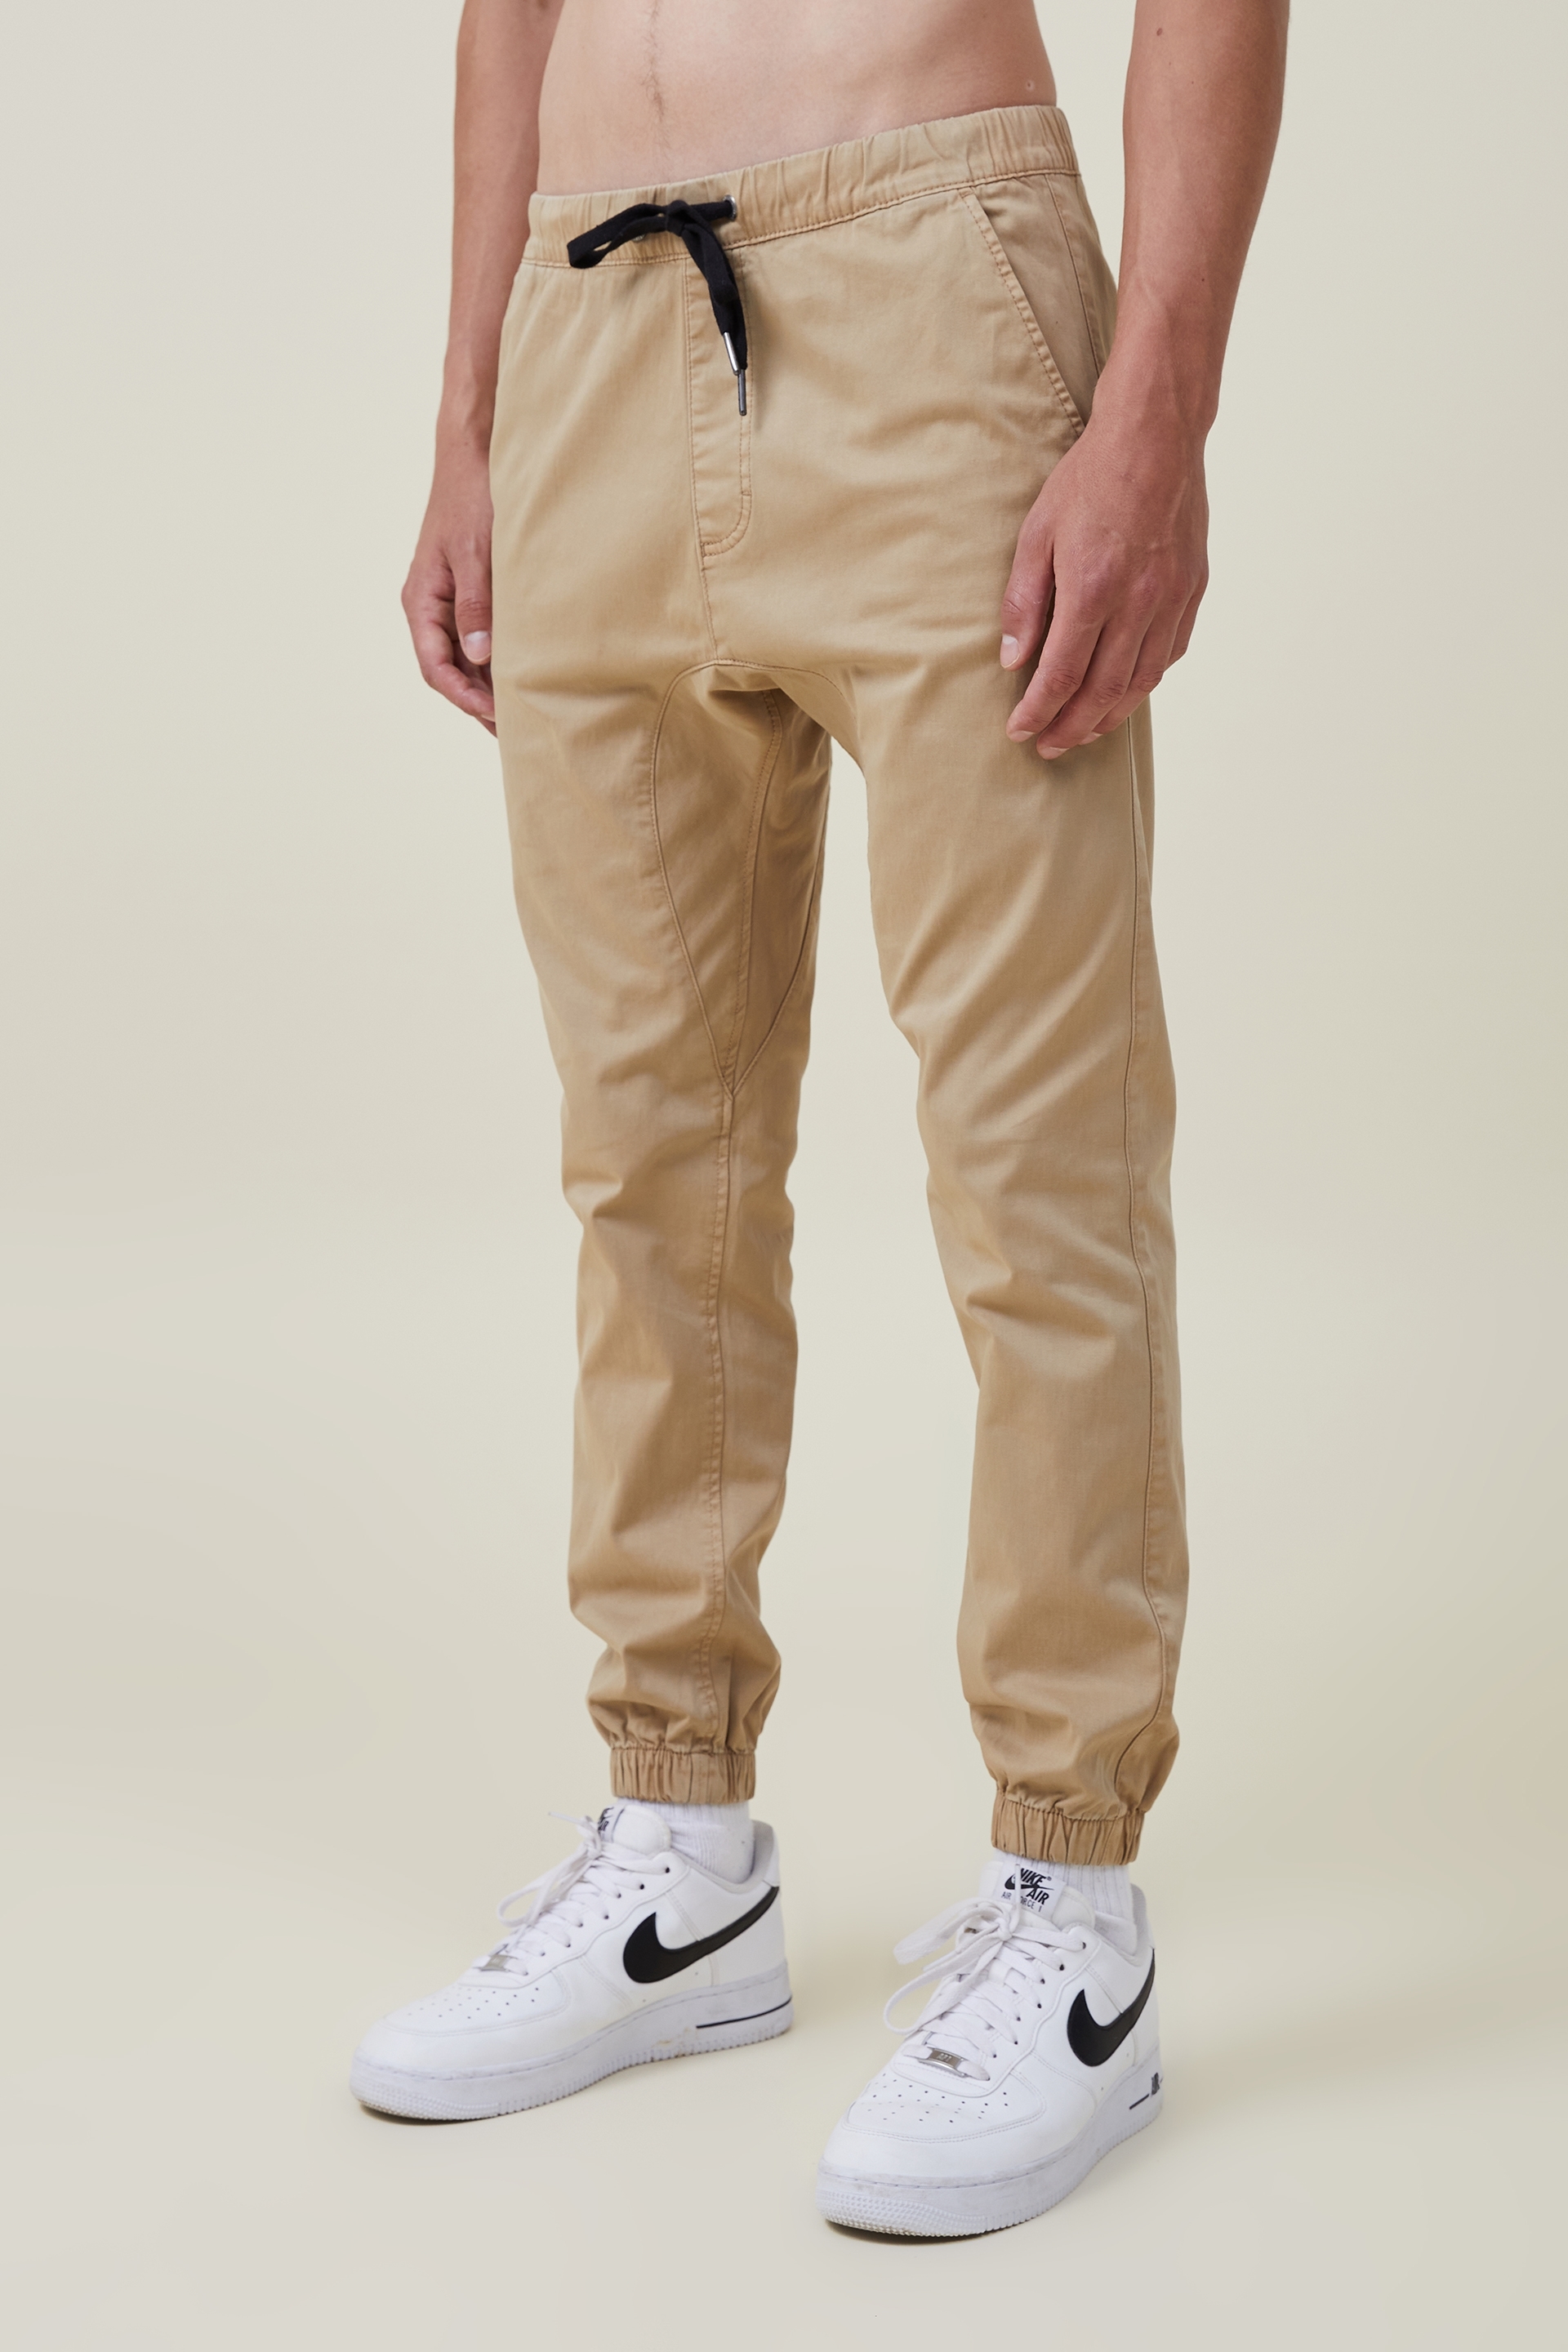 Buy Mens Cuffed Pants Online In India  Etsy India